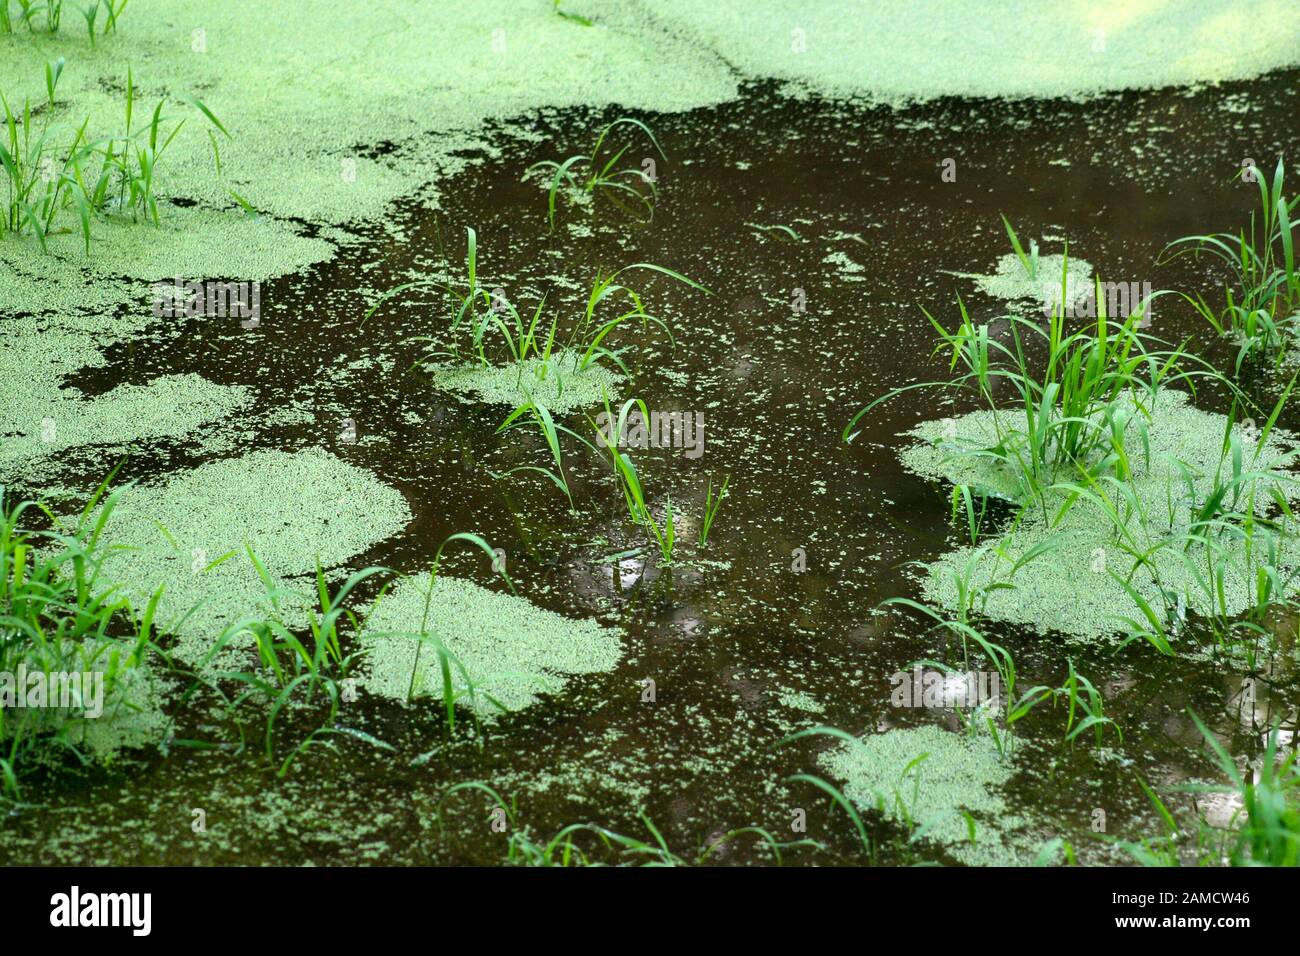 Duckweed on the surface of a pond Stock Photo